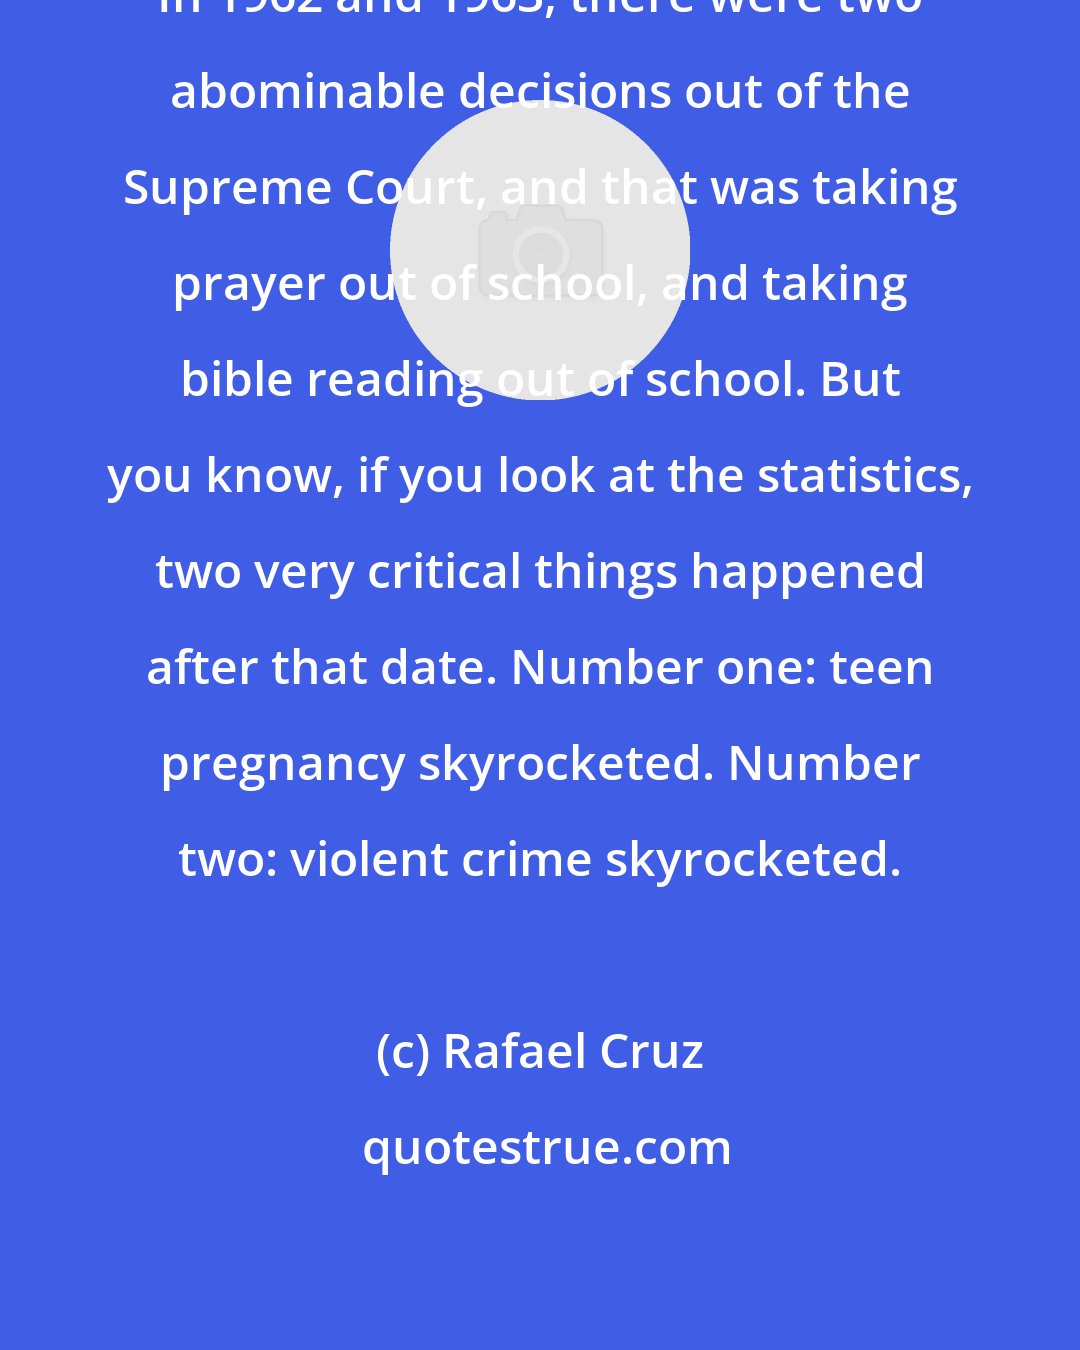 Rafael Cruz: In 1962 and 1963, there were two abominable decisions out of the Supreme Court, and that was taking prayer out of school, and taking bible reading out of school. But you know, if you look at the statistics, two very critical things happened after that date. Number one: teen pregnancy skyrocketed. Number two: violent crime skyrocketed.